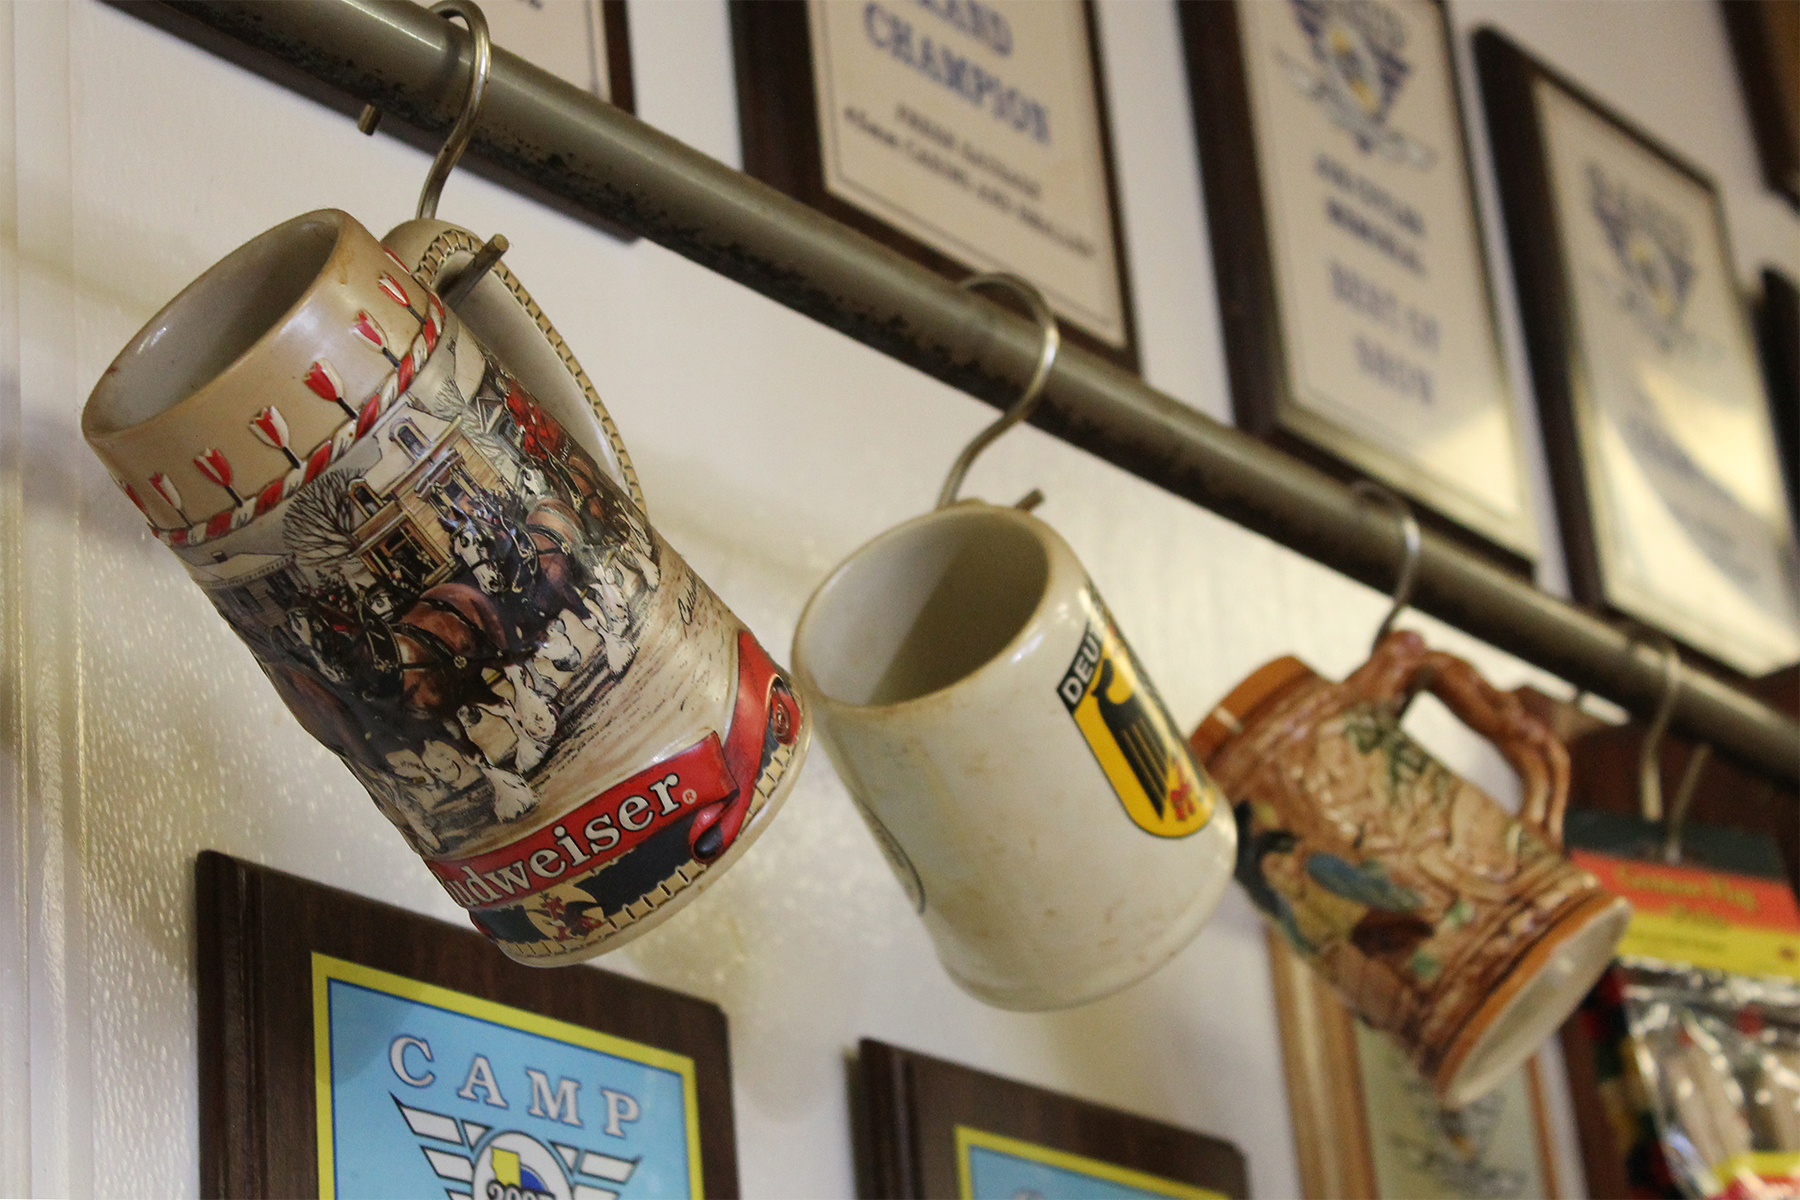 Traditional beer steins hang from a rack on the wall of Muller's shop, collected from around Germany. (Photos by Justina Sharp)